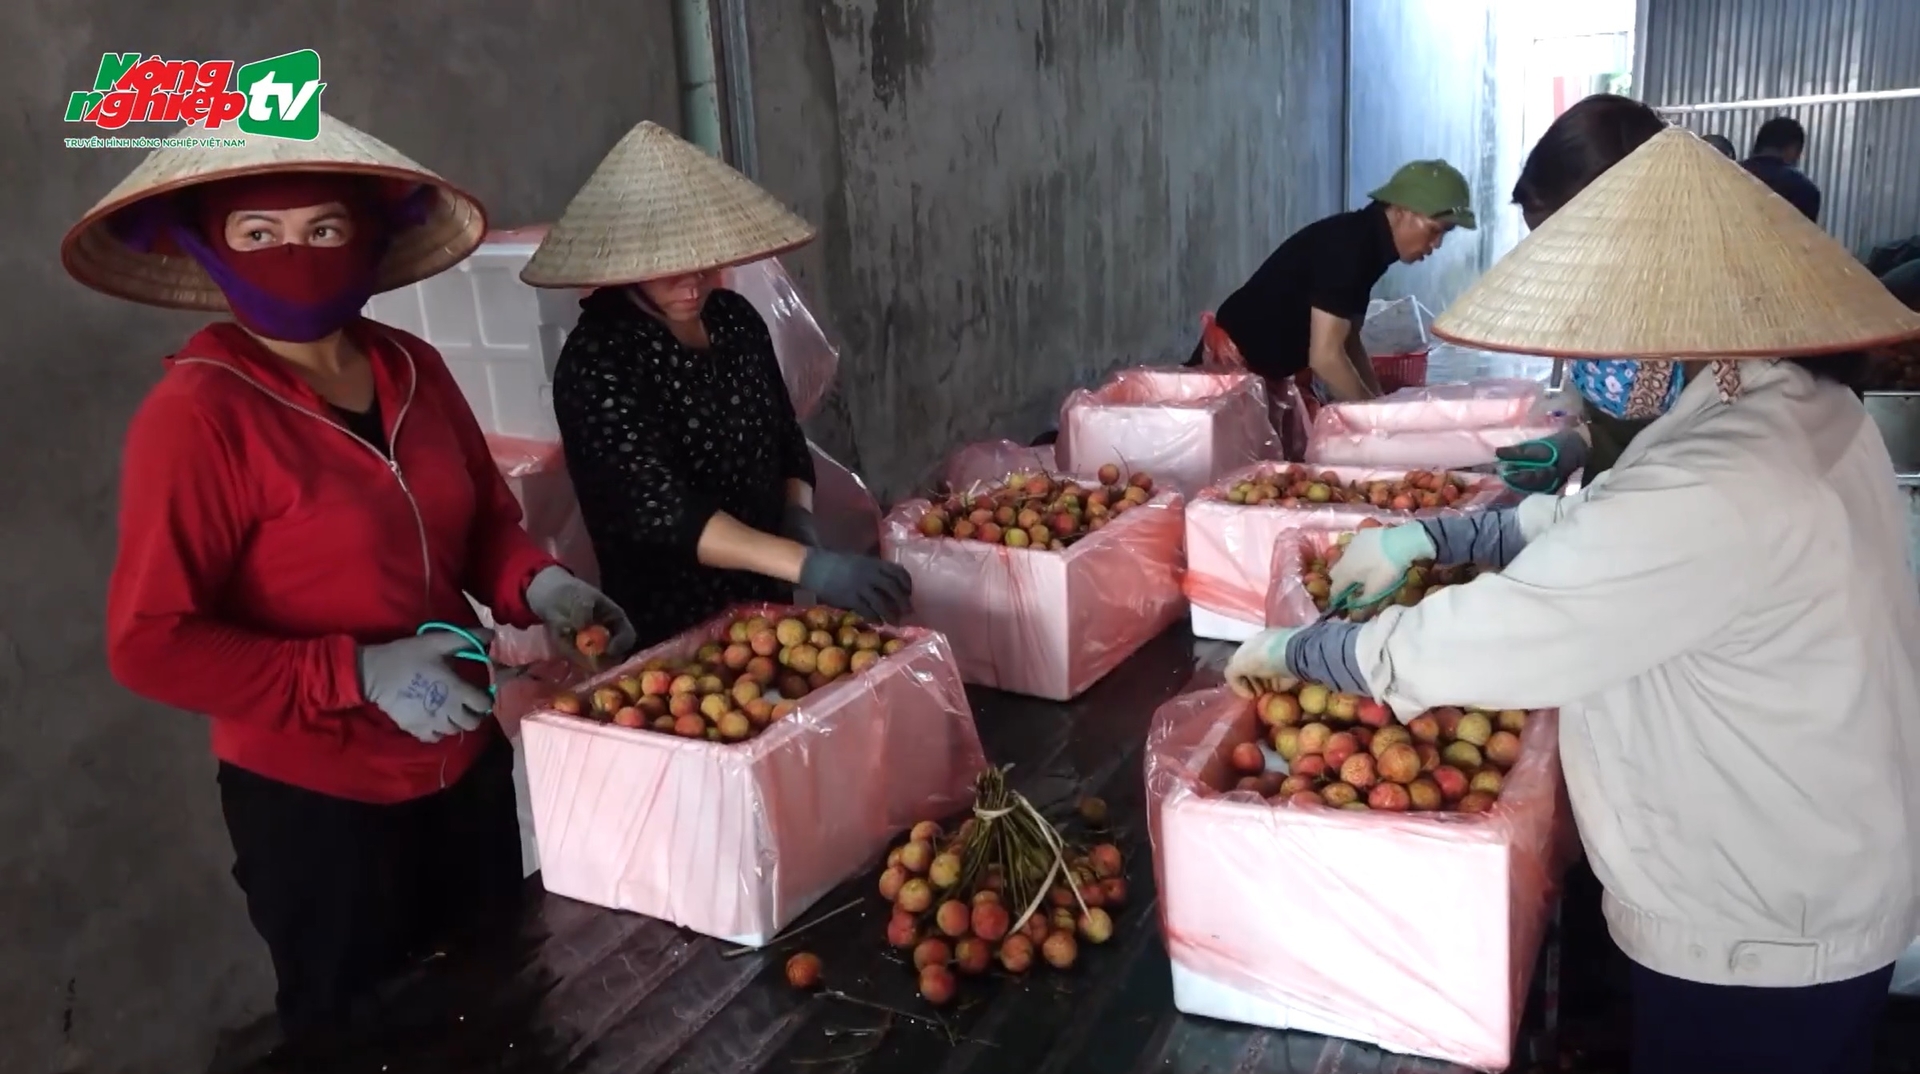 The lychee crop this year is going to be good news once again as a bountiful harvest is within expectations. But with a good harvest comes the pressure of consumption. Photo: AgriTV.